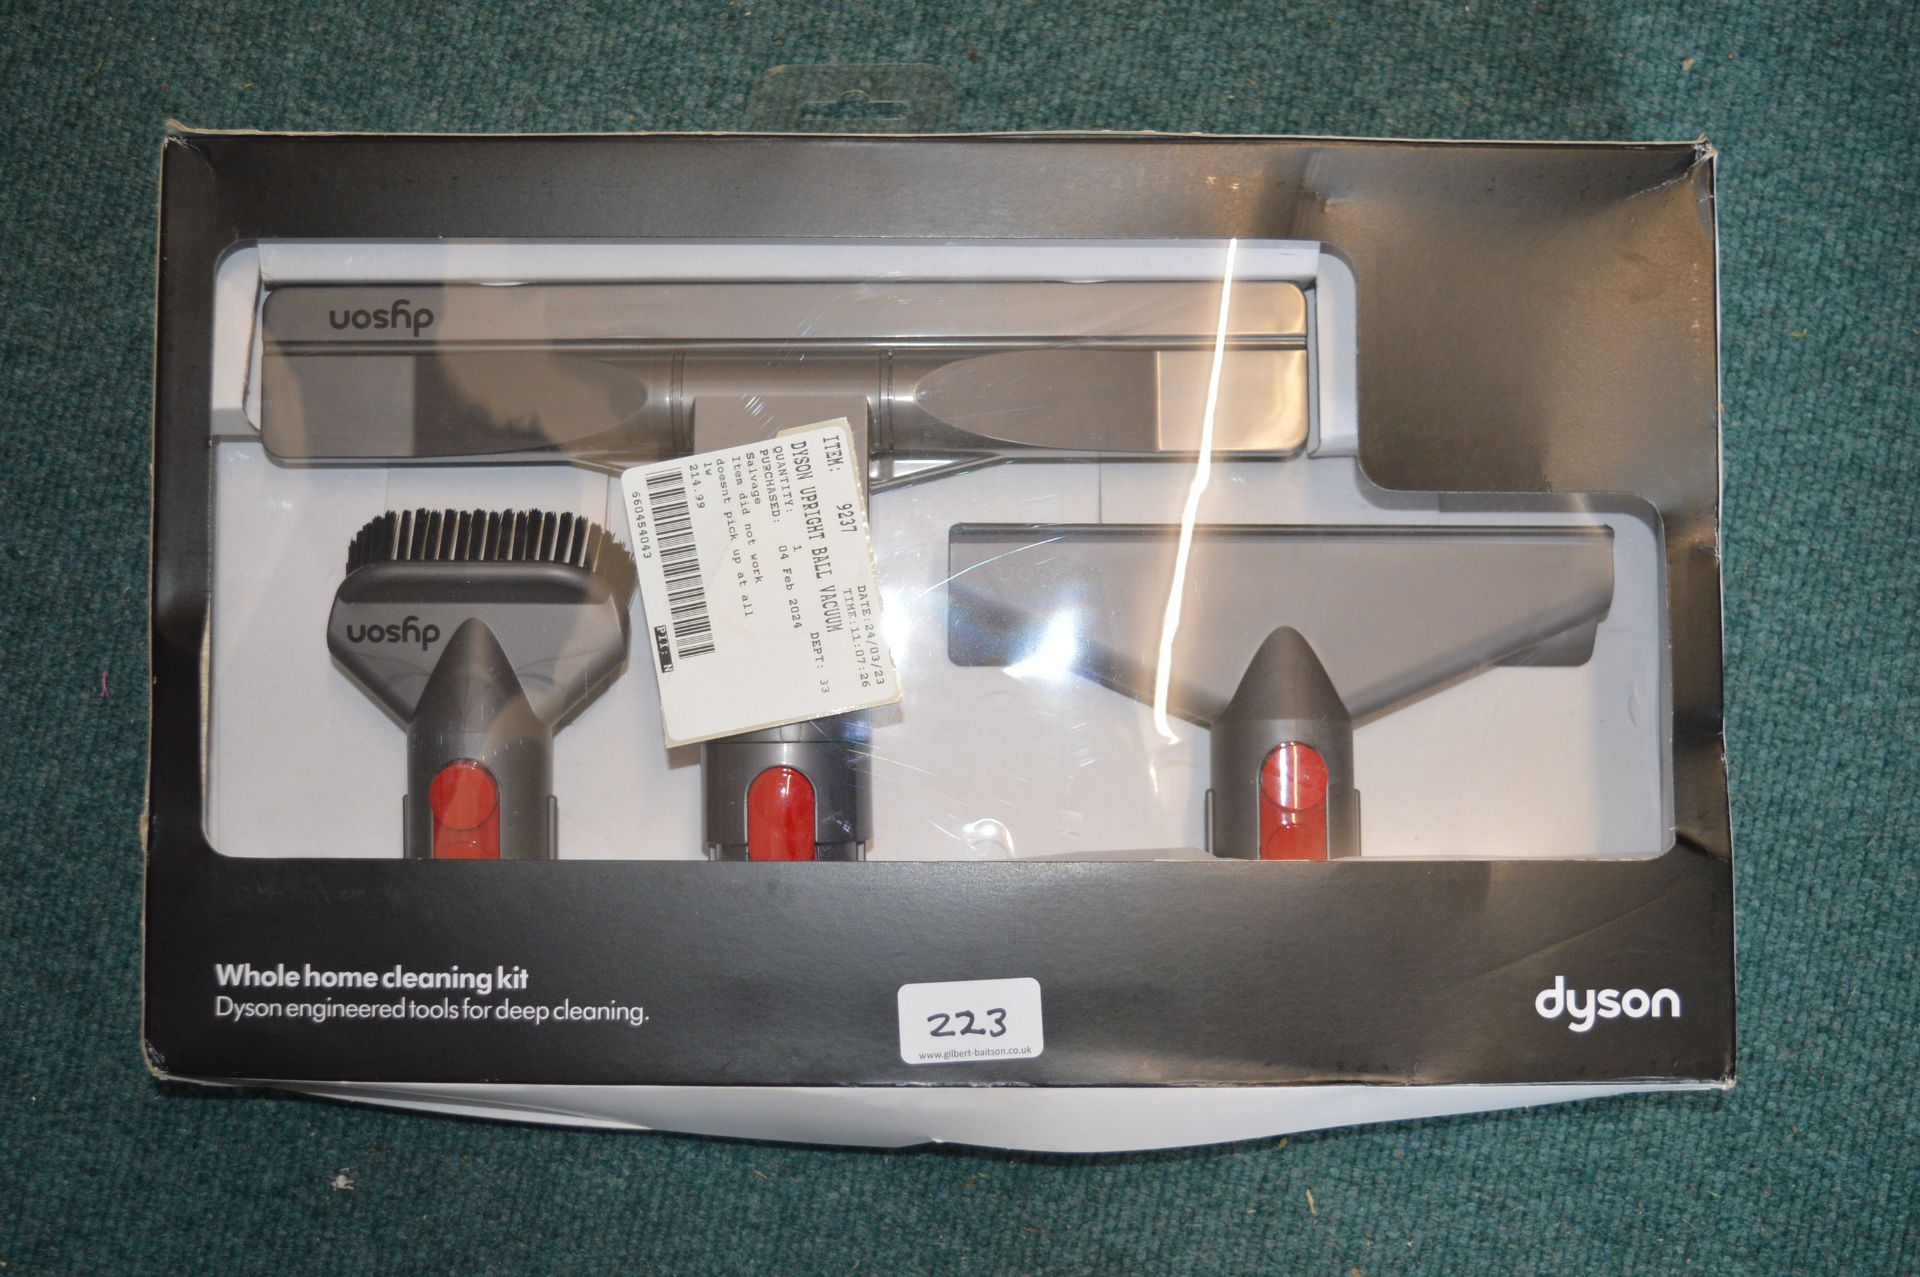 *Dyson Whole Home Cleaning Kit